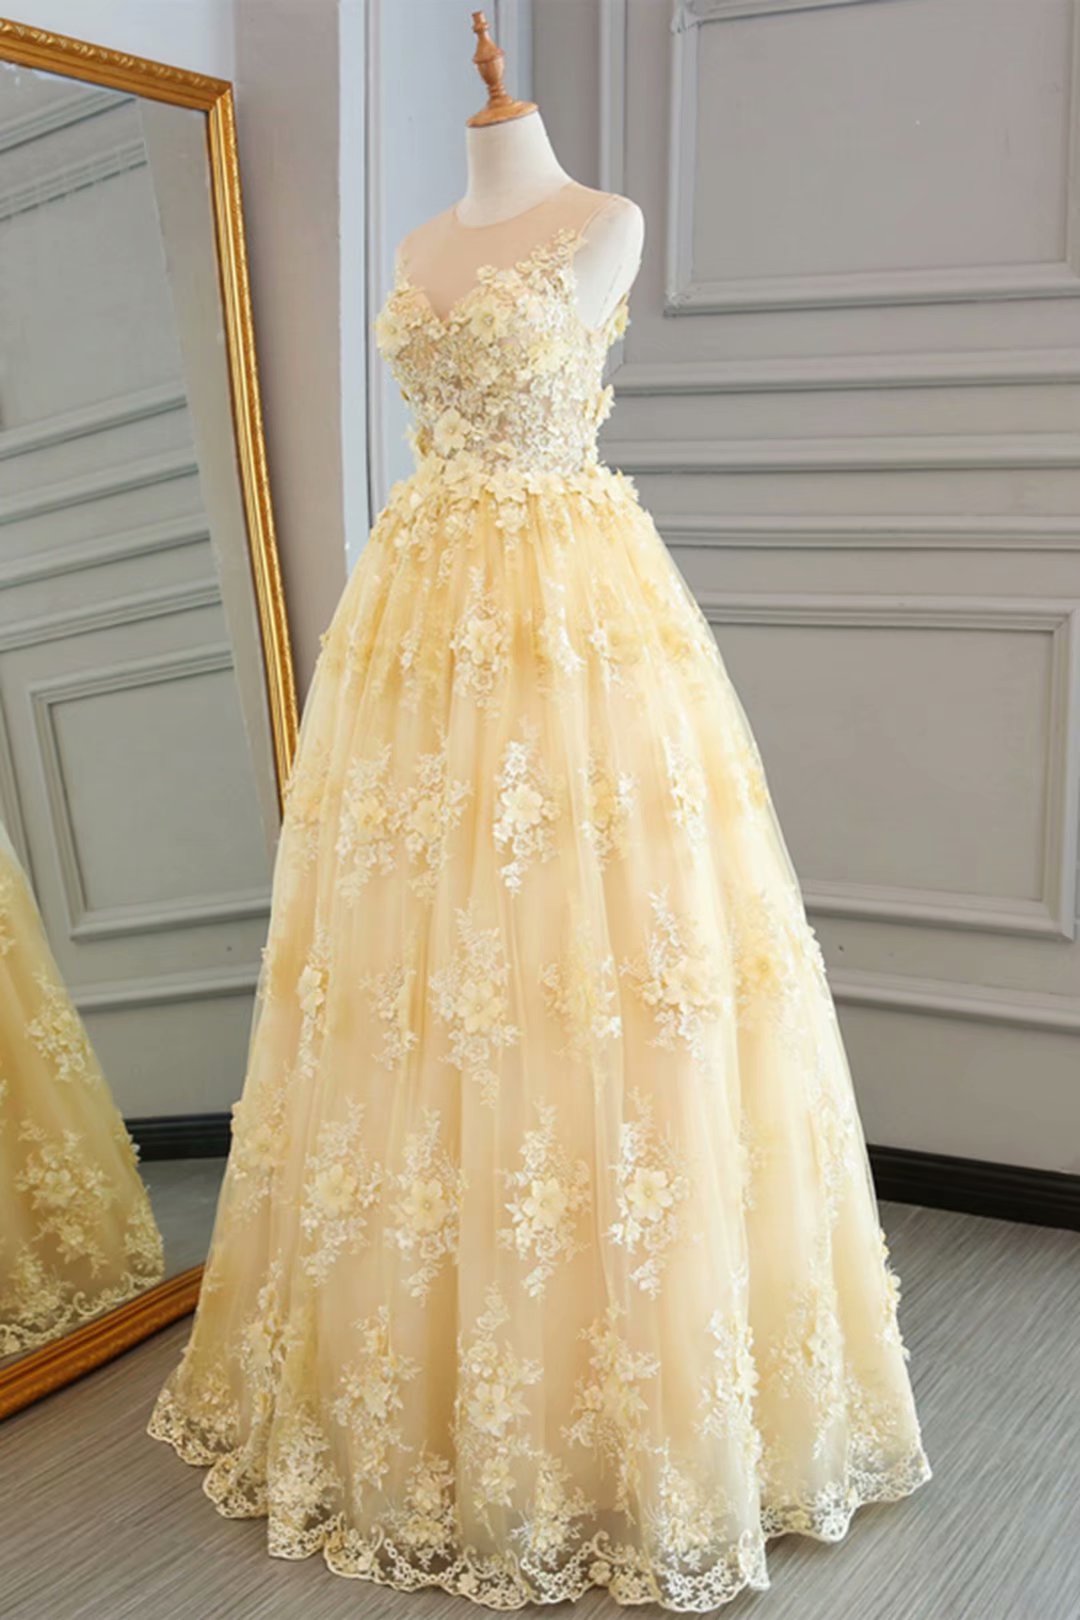 Long Prom Dresses Yellow Sheer Neck A Line Lace Evening Formal Dresses